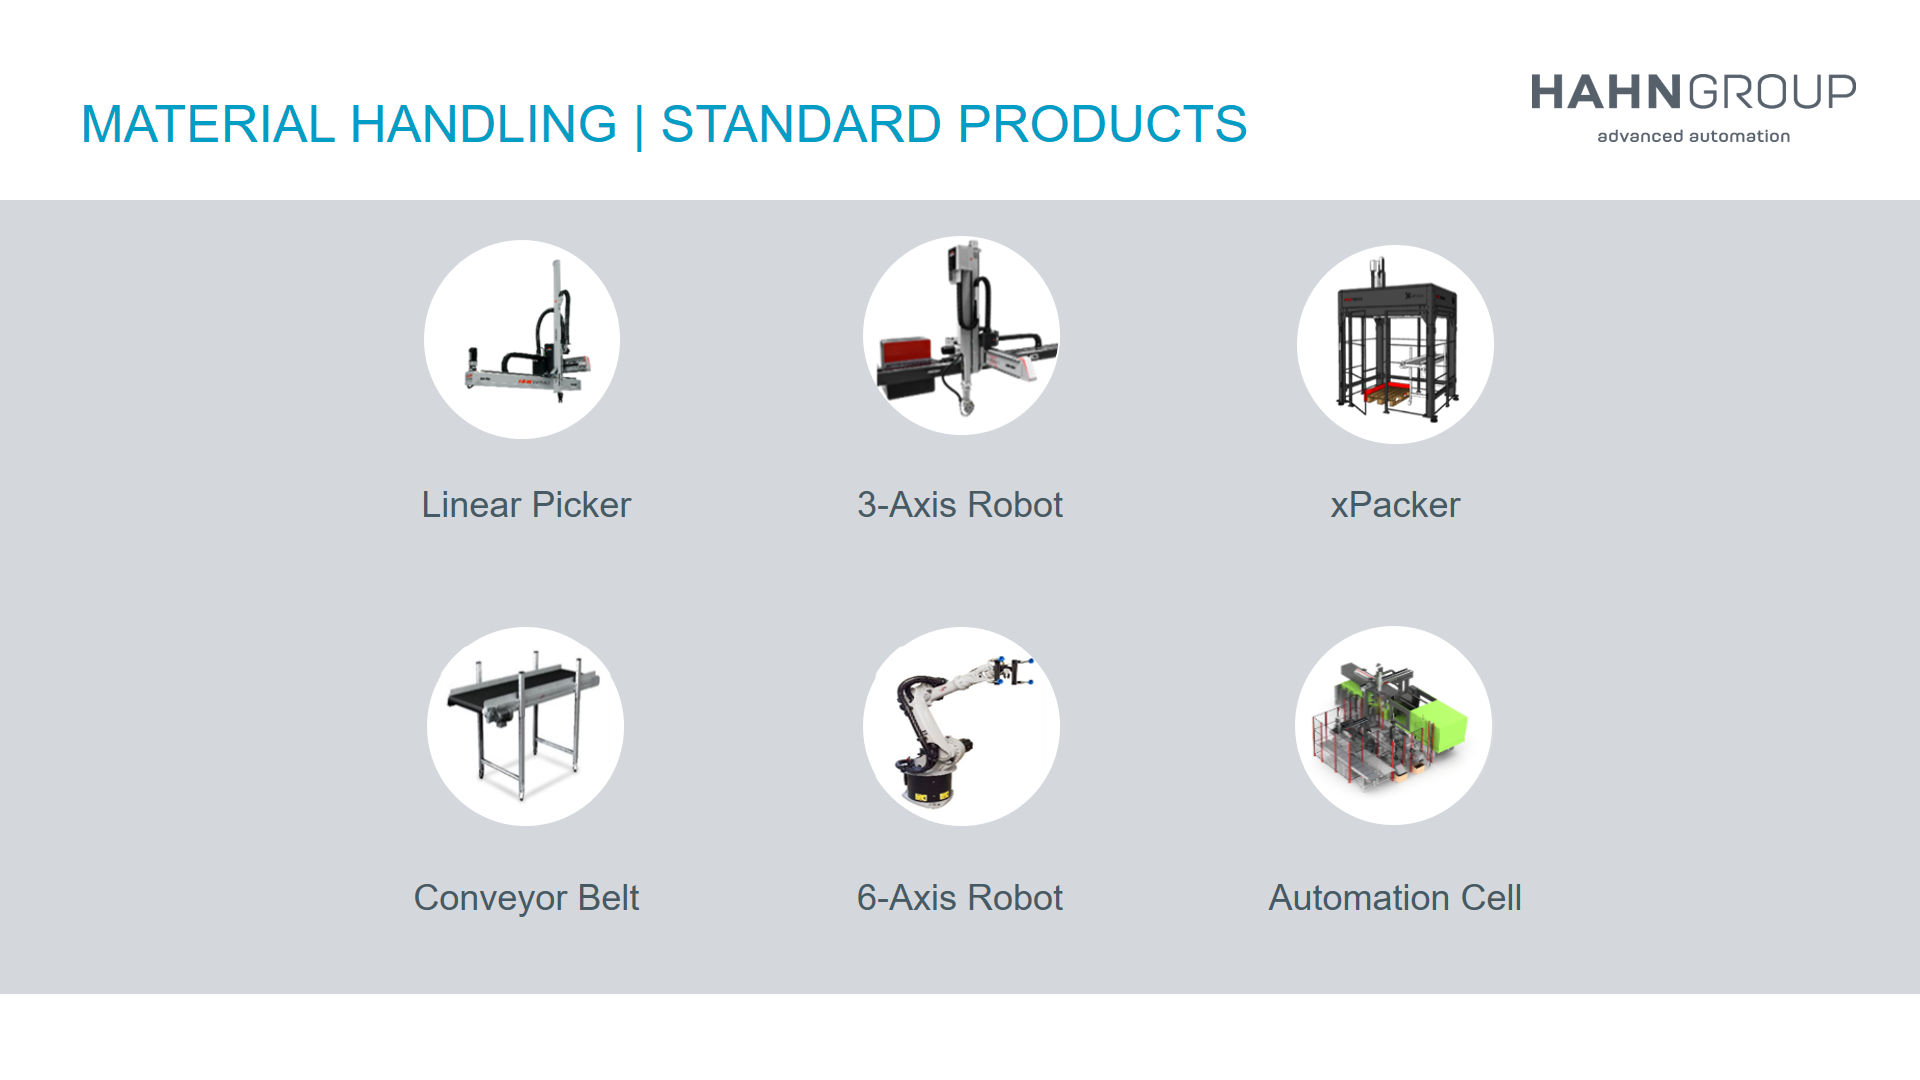 Standard Products of HAHN Group Material Handling